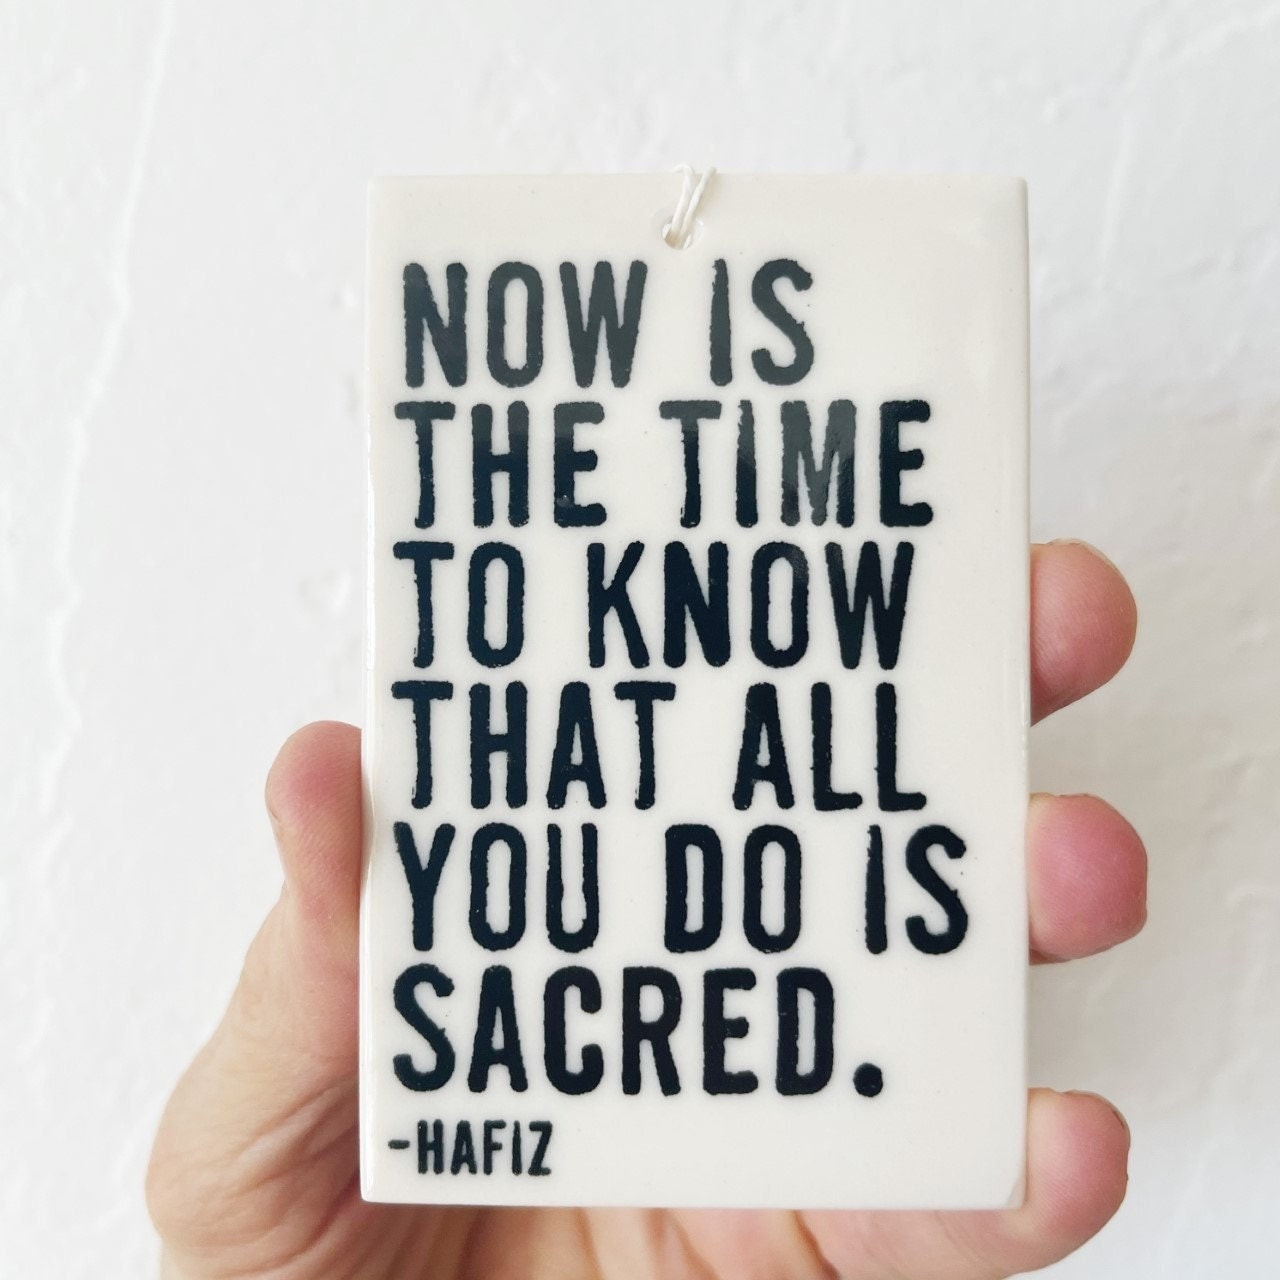 hafiz wall hanging | hafiz quote | hafez quote | ceramic wall tag | screenprinted ceramics | gift for friend | meaningful gift | home decor